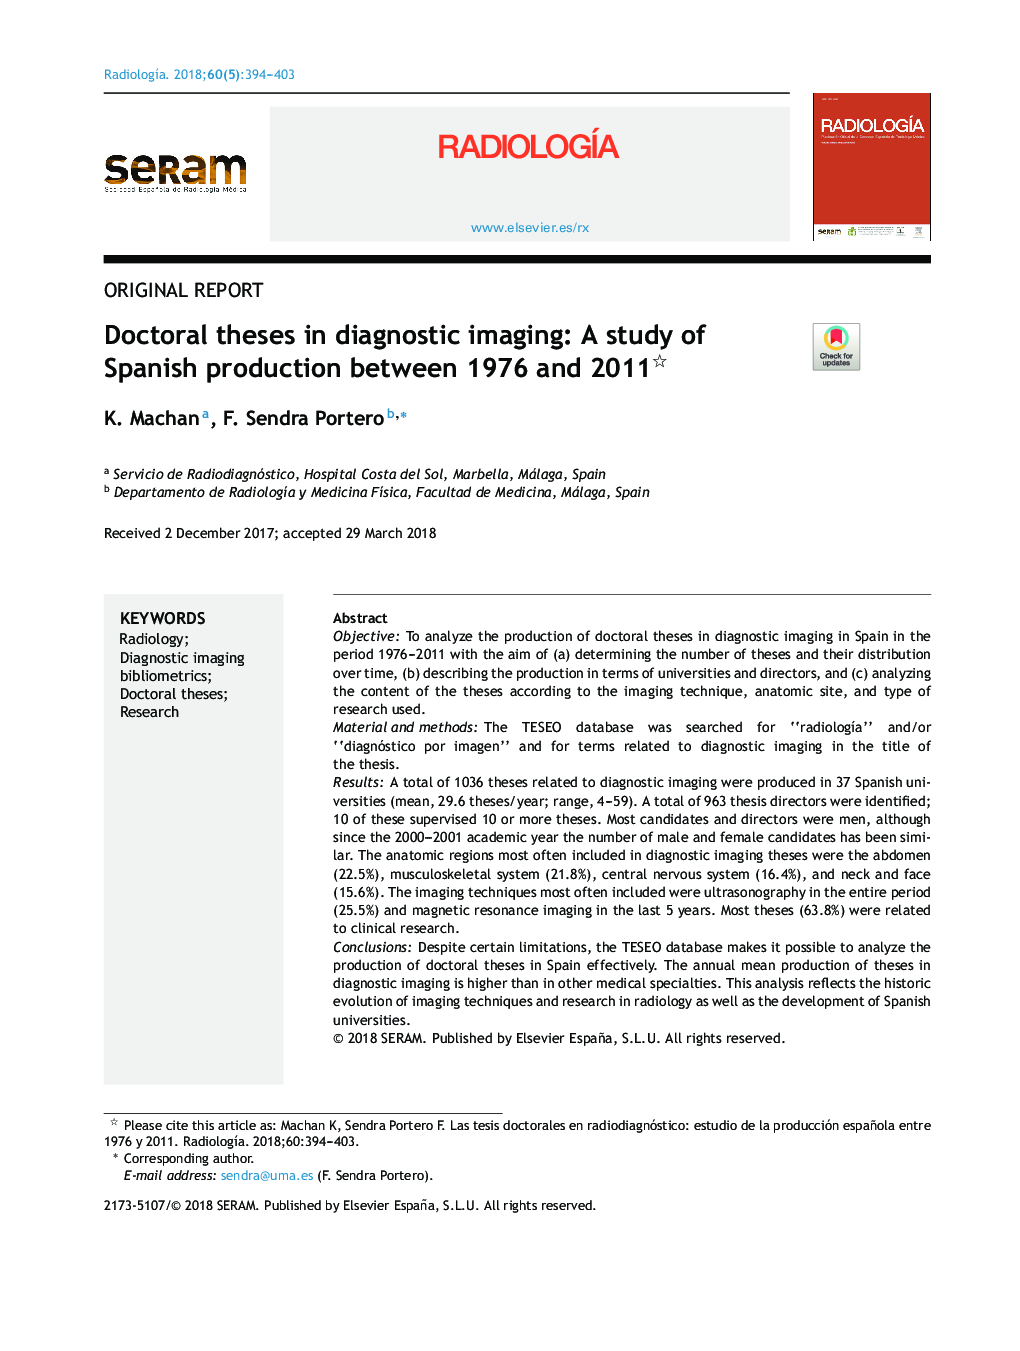 Doctoral theses in diagnostic imaging: A study of Spanish production between 1976 and 2011